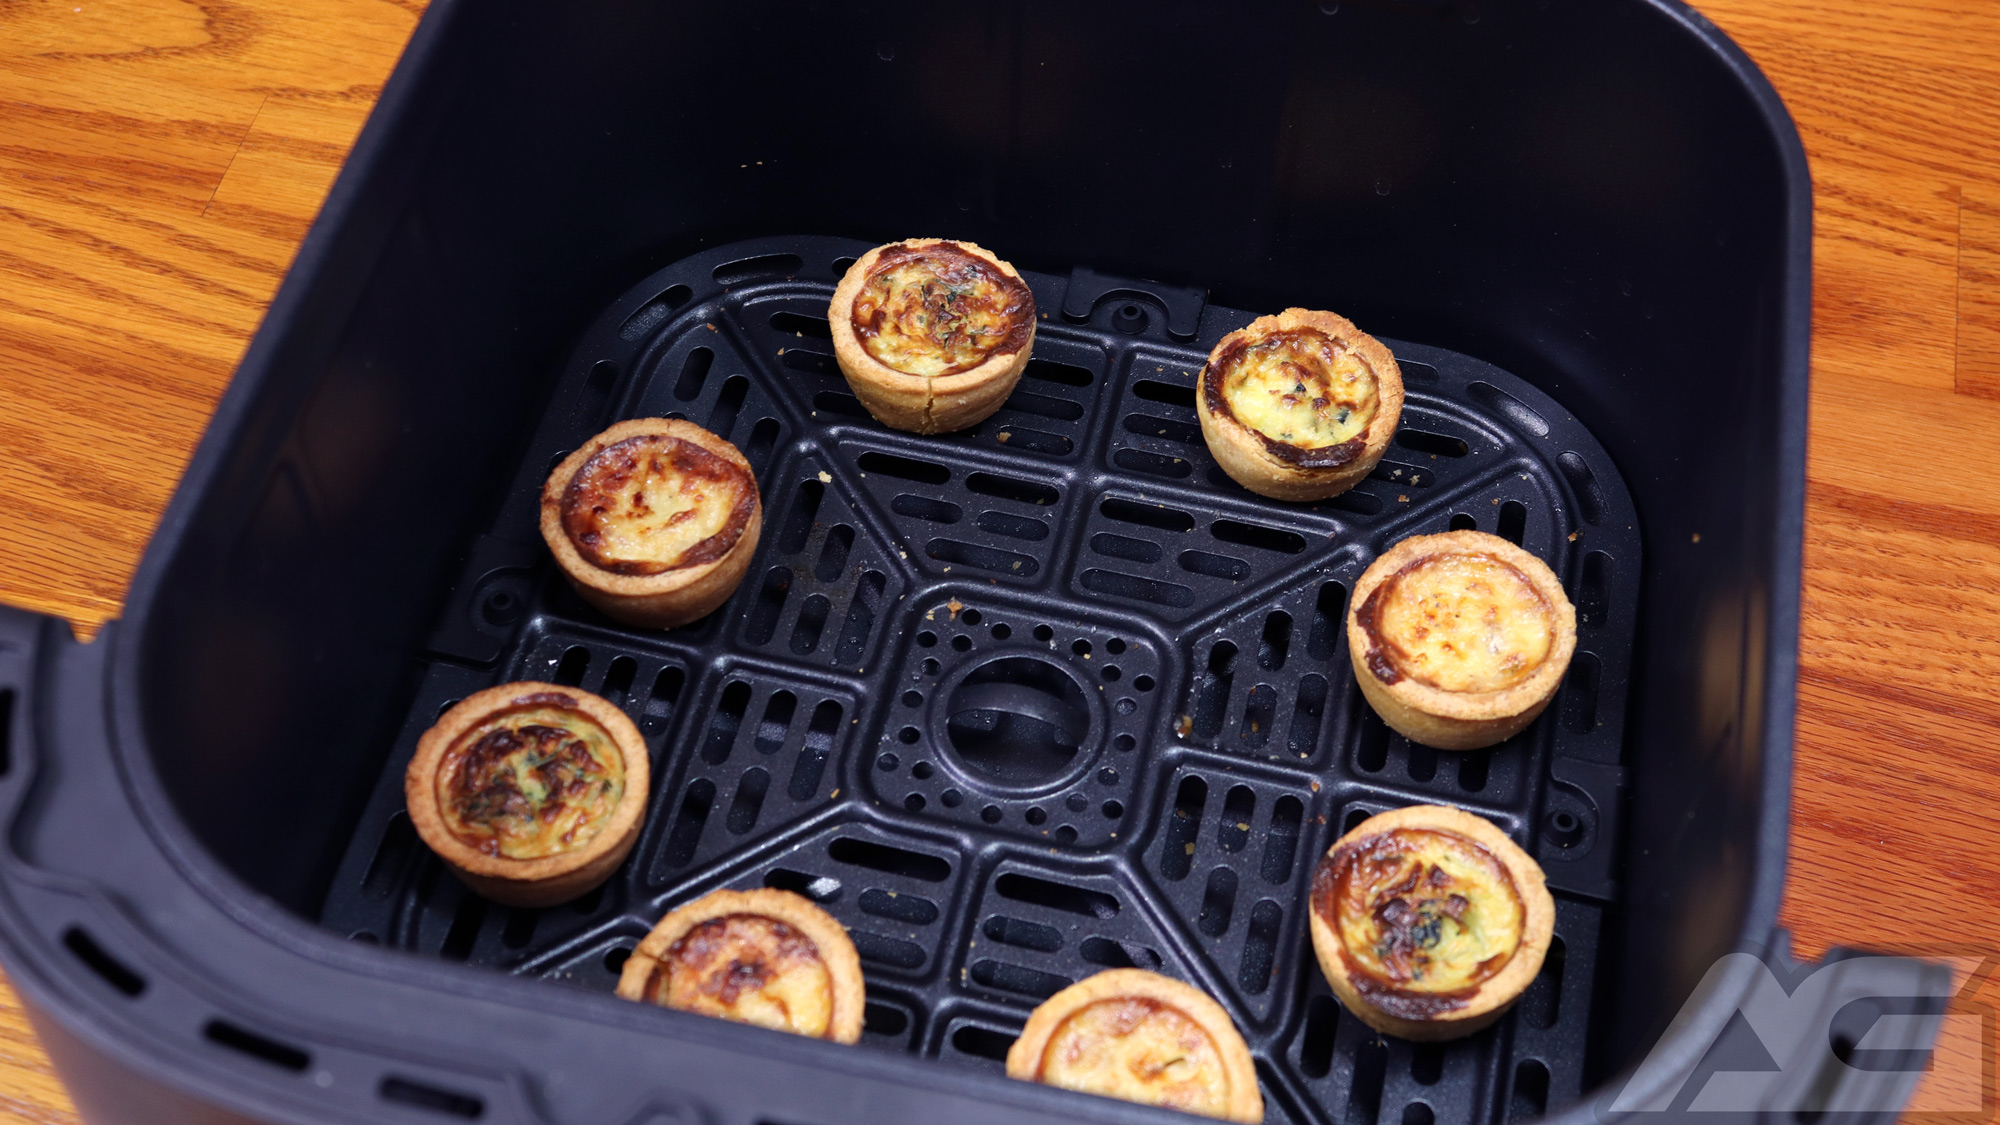 https://www.androidguys.com/wp-content/uploads/2022/10/Dreo-Air-Fryer-Pro-Max-quiche.jpg